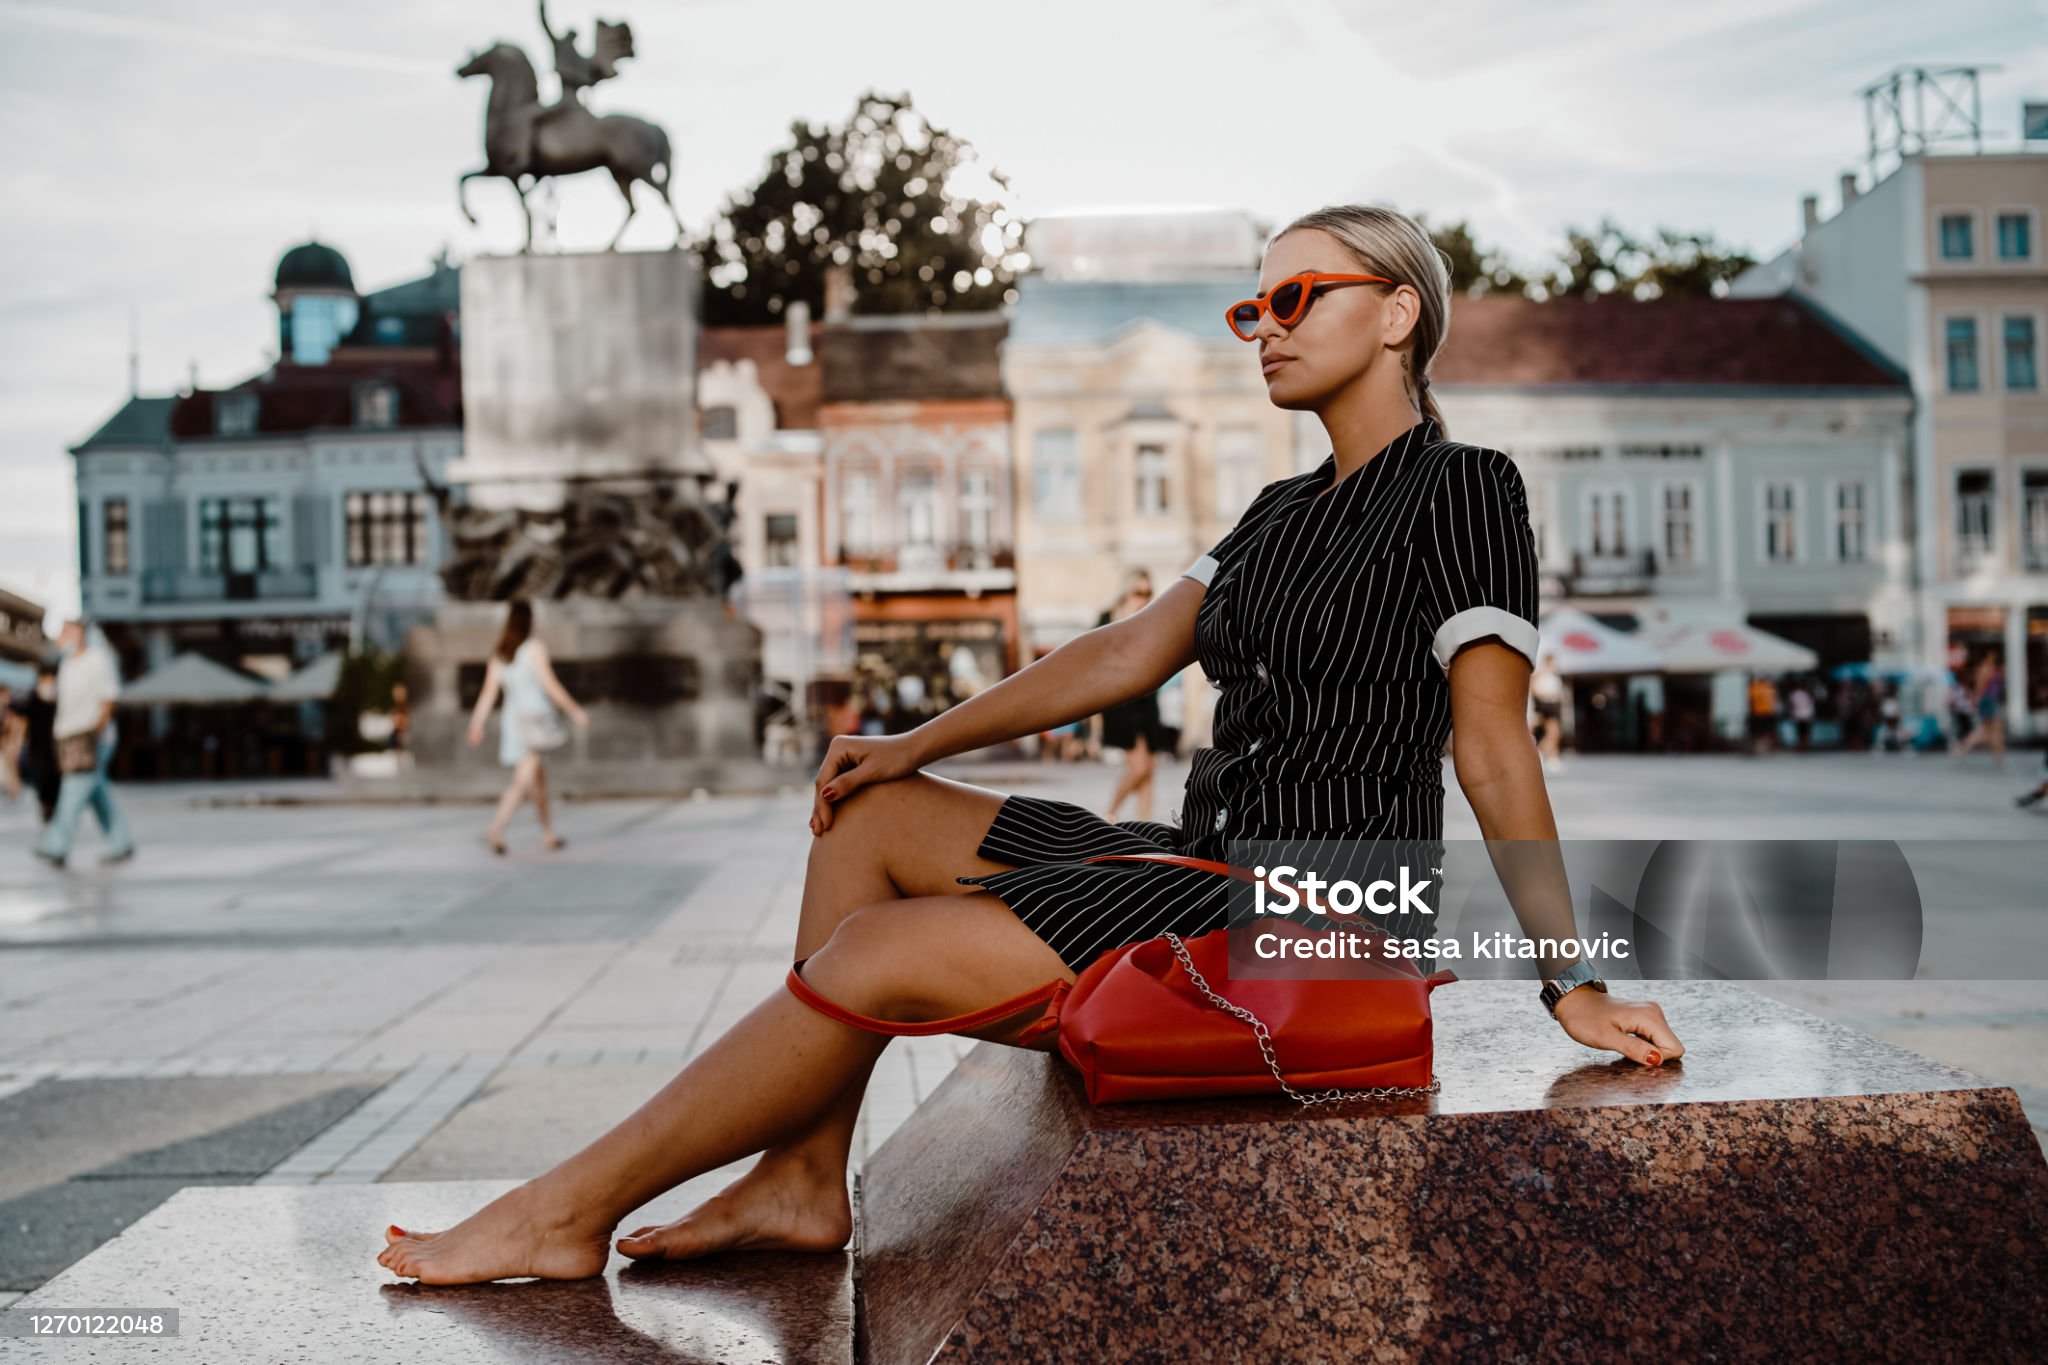 https://media.istockphoto.com/id/1270122048/photo/young-blonde-woman-taking-a-rest-in-the-town-square.jpg?s=2048x2048&amp;w=is&amp;k=20&amp;c=STwNK-STH21HyeImBO4LhshP8S-DYwjRq7Wp0DRPav4=